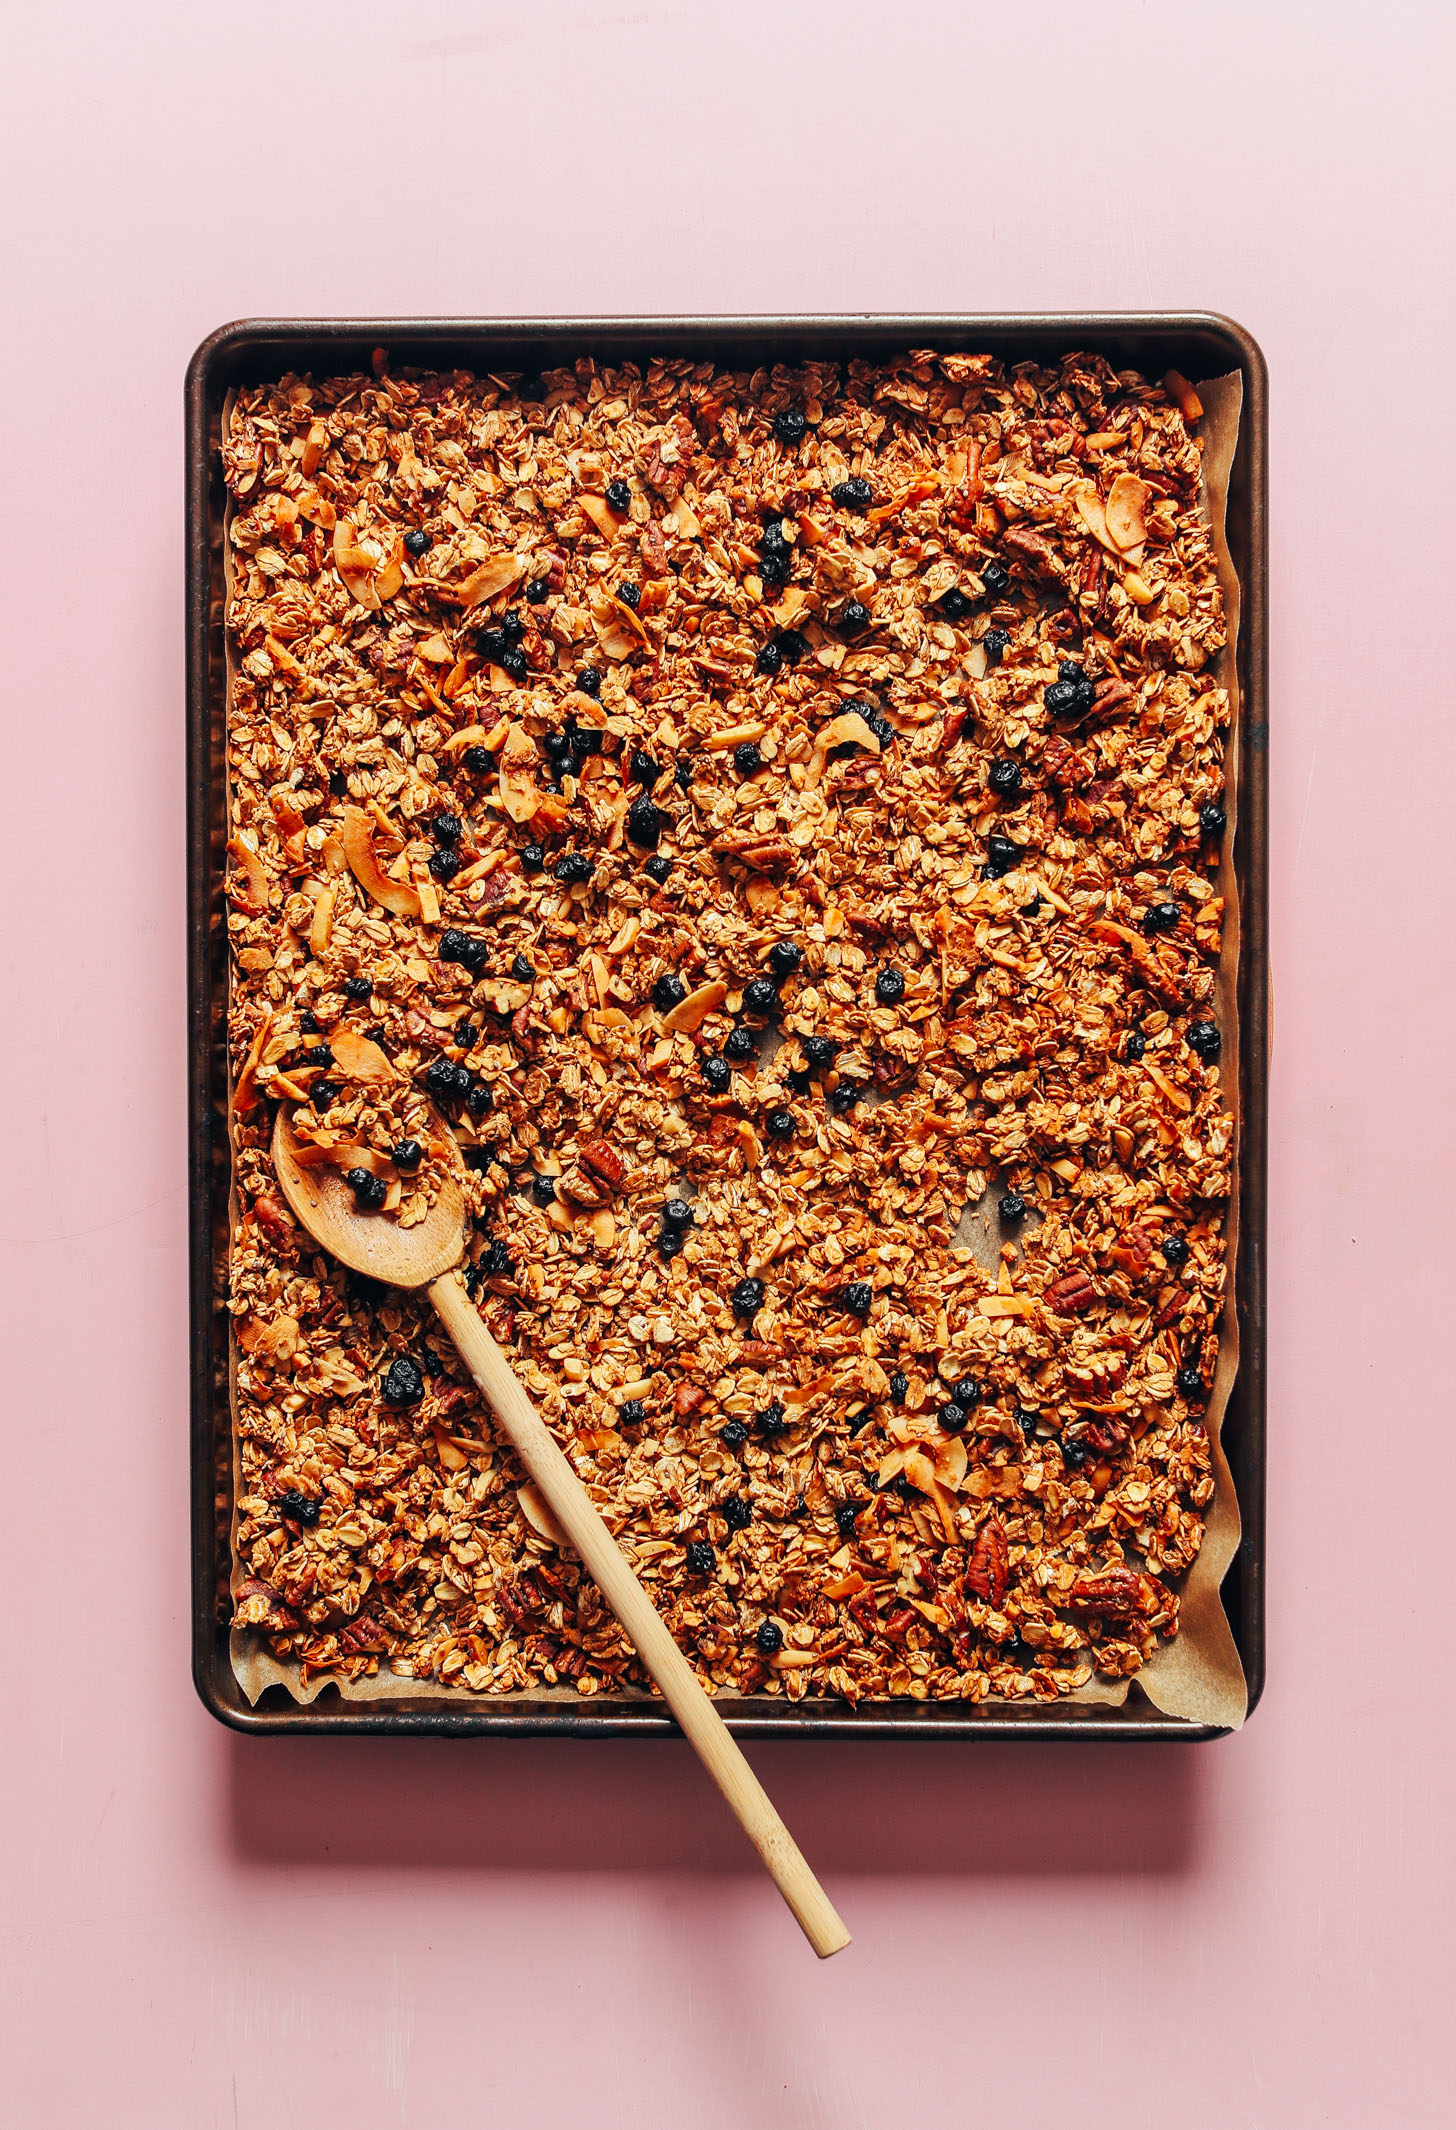 Parchment-lined baking sheet filled with homemade gluten-free vegan granola